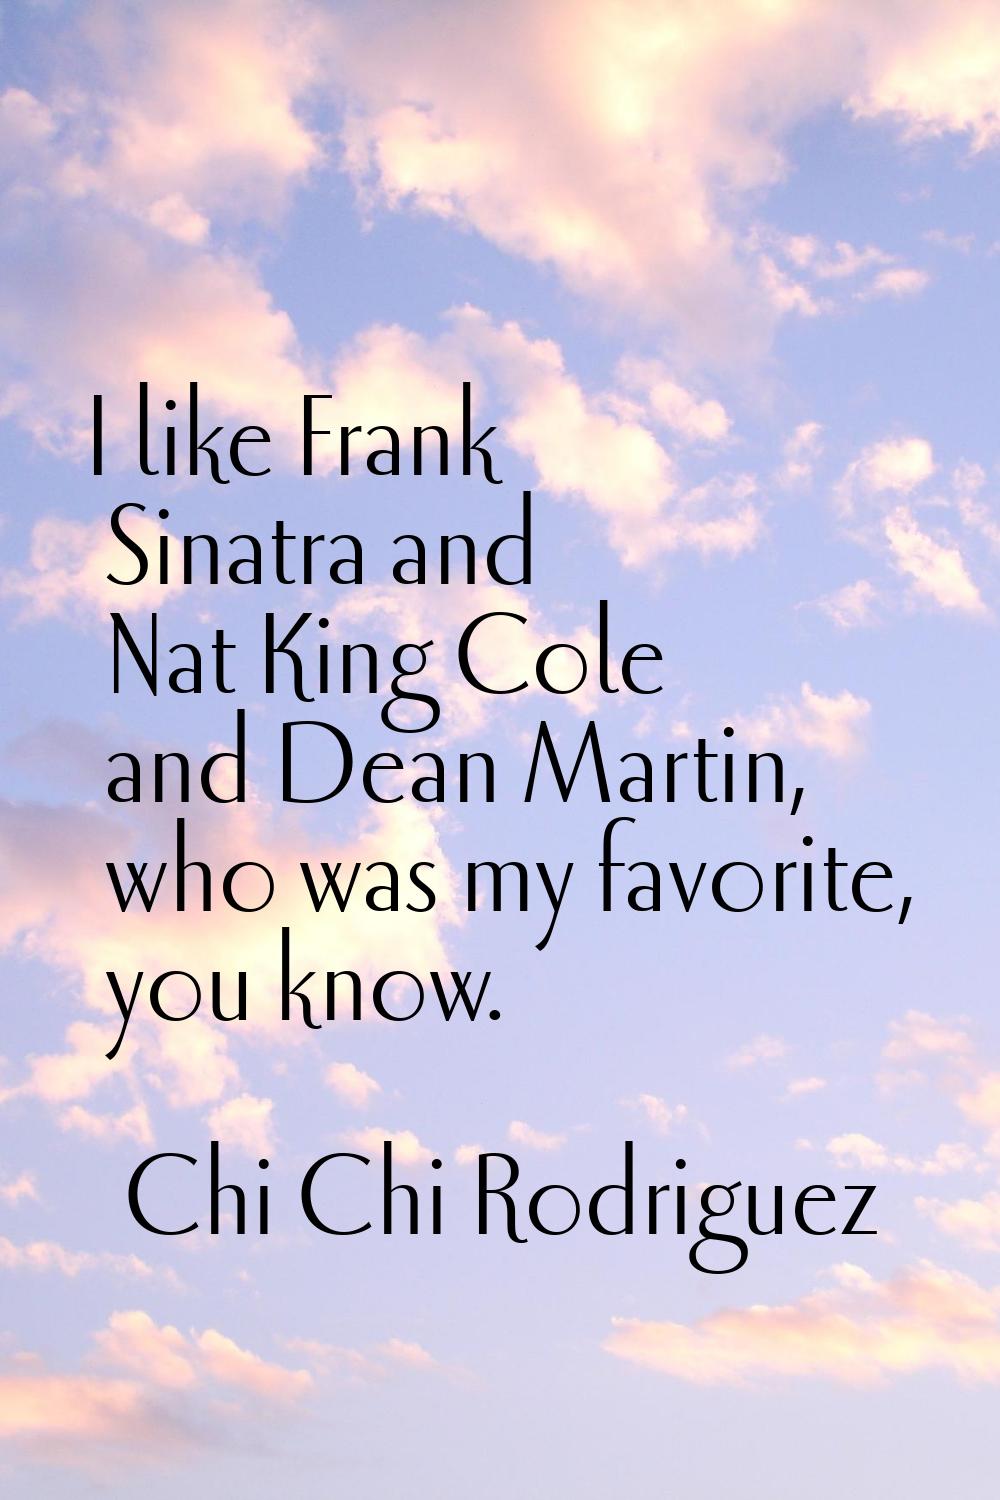 I like Frank Sinatra and Nat King Cole and Dean Martin, who was my favorite, you know.